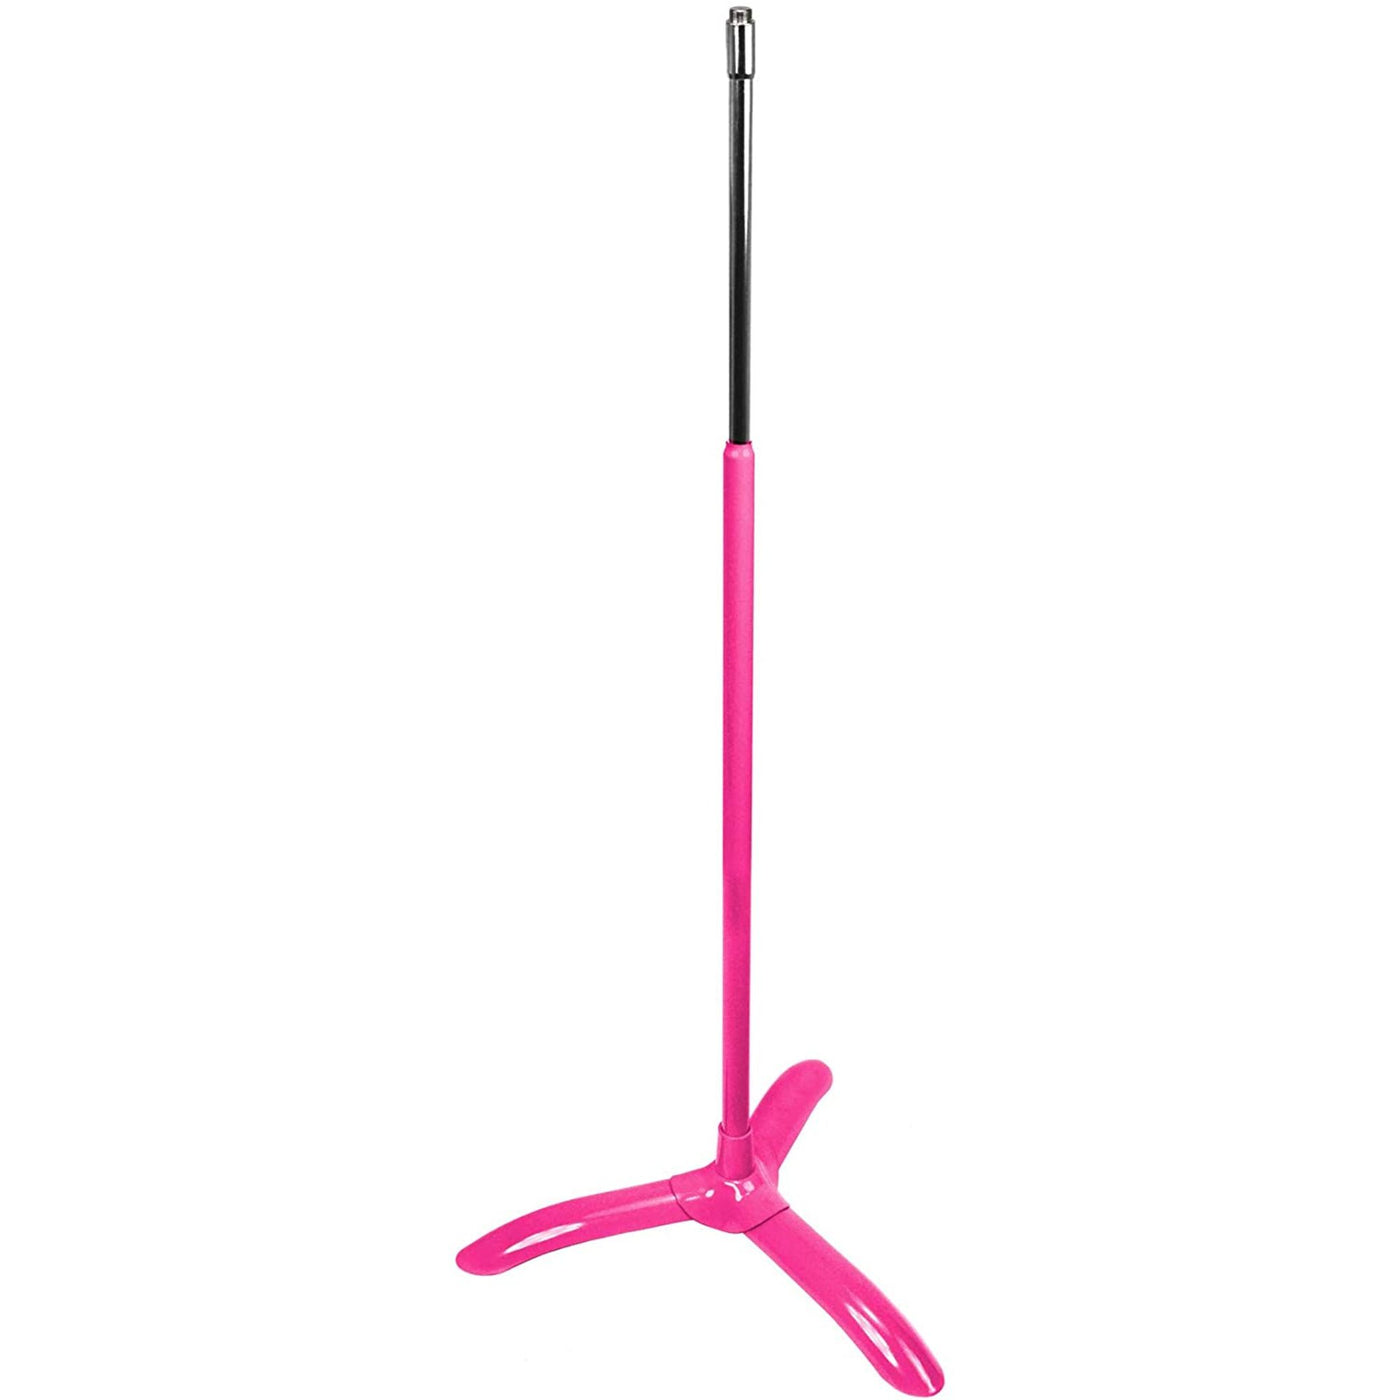 Manhasset Adjustable Height Universal Chorale Microphone Stand, Hot Pink (3016HPK)